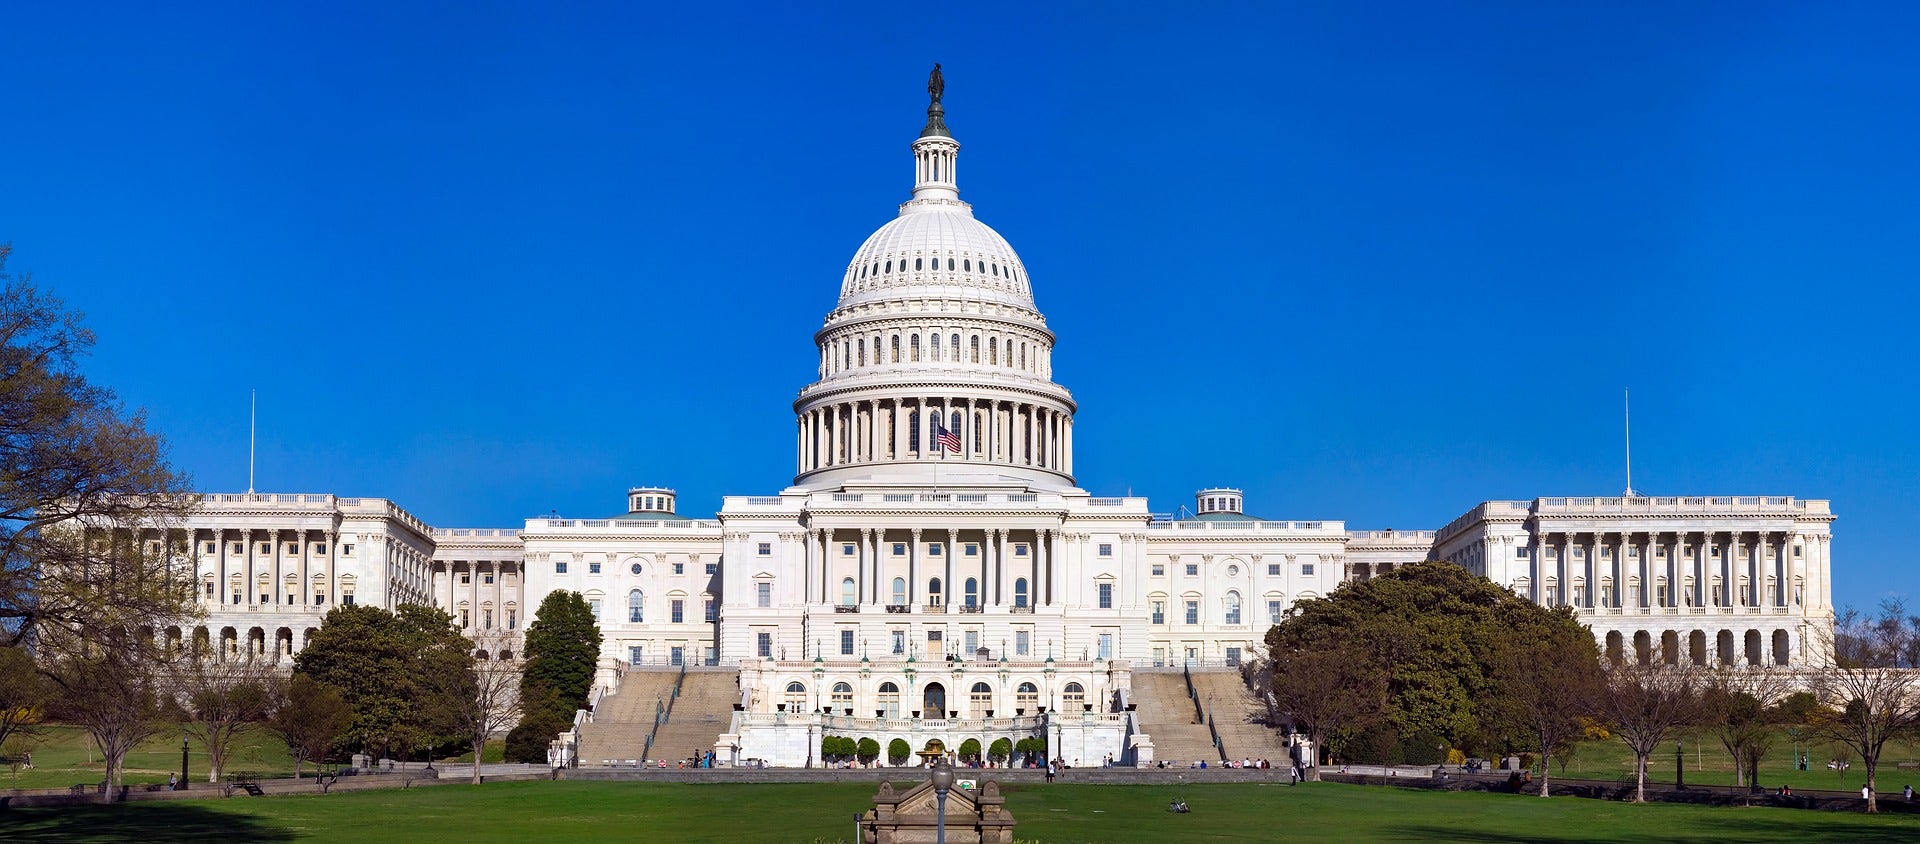 Control Of Congress Up For Grabs In Midterms: 12 Stocks To Watch